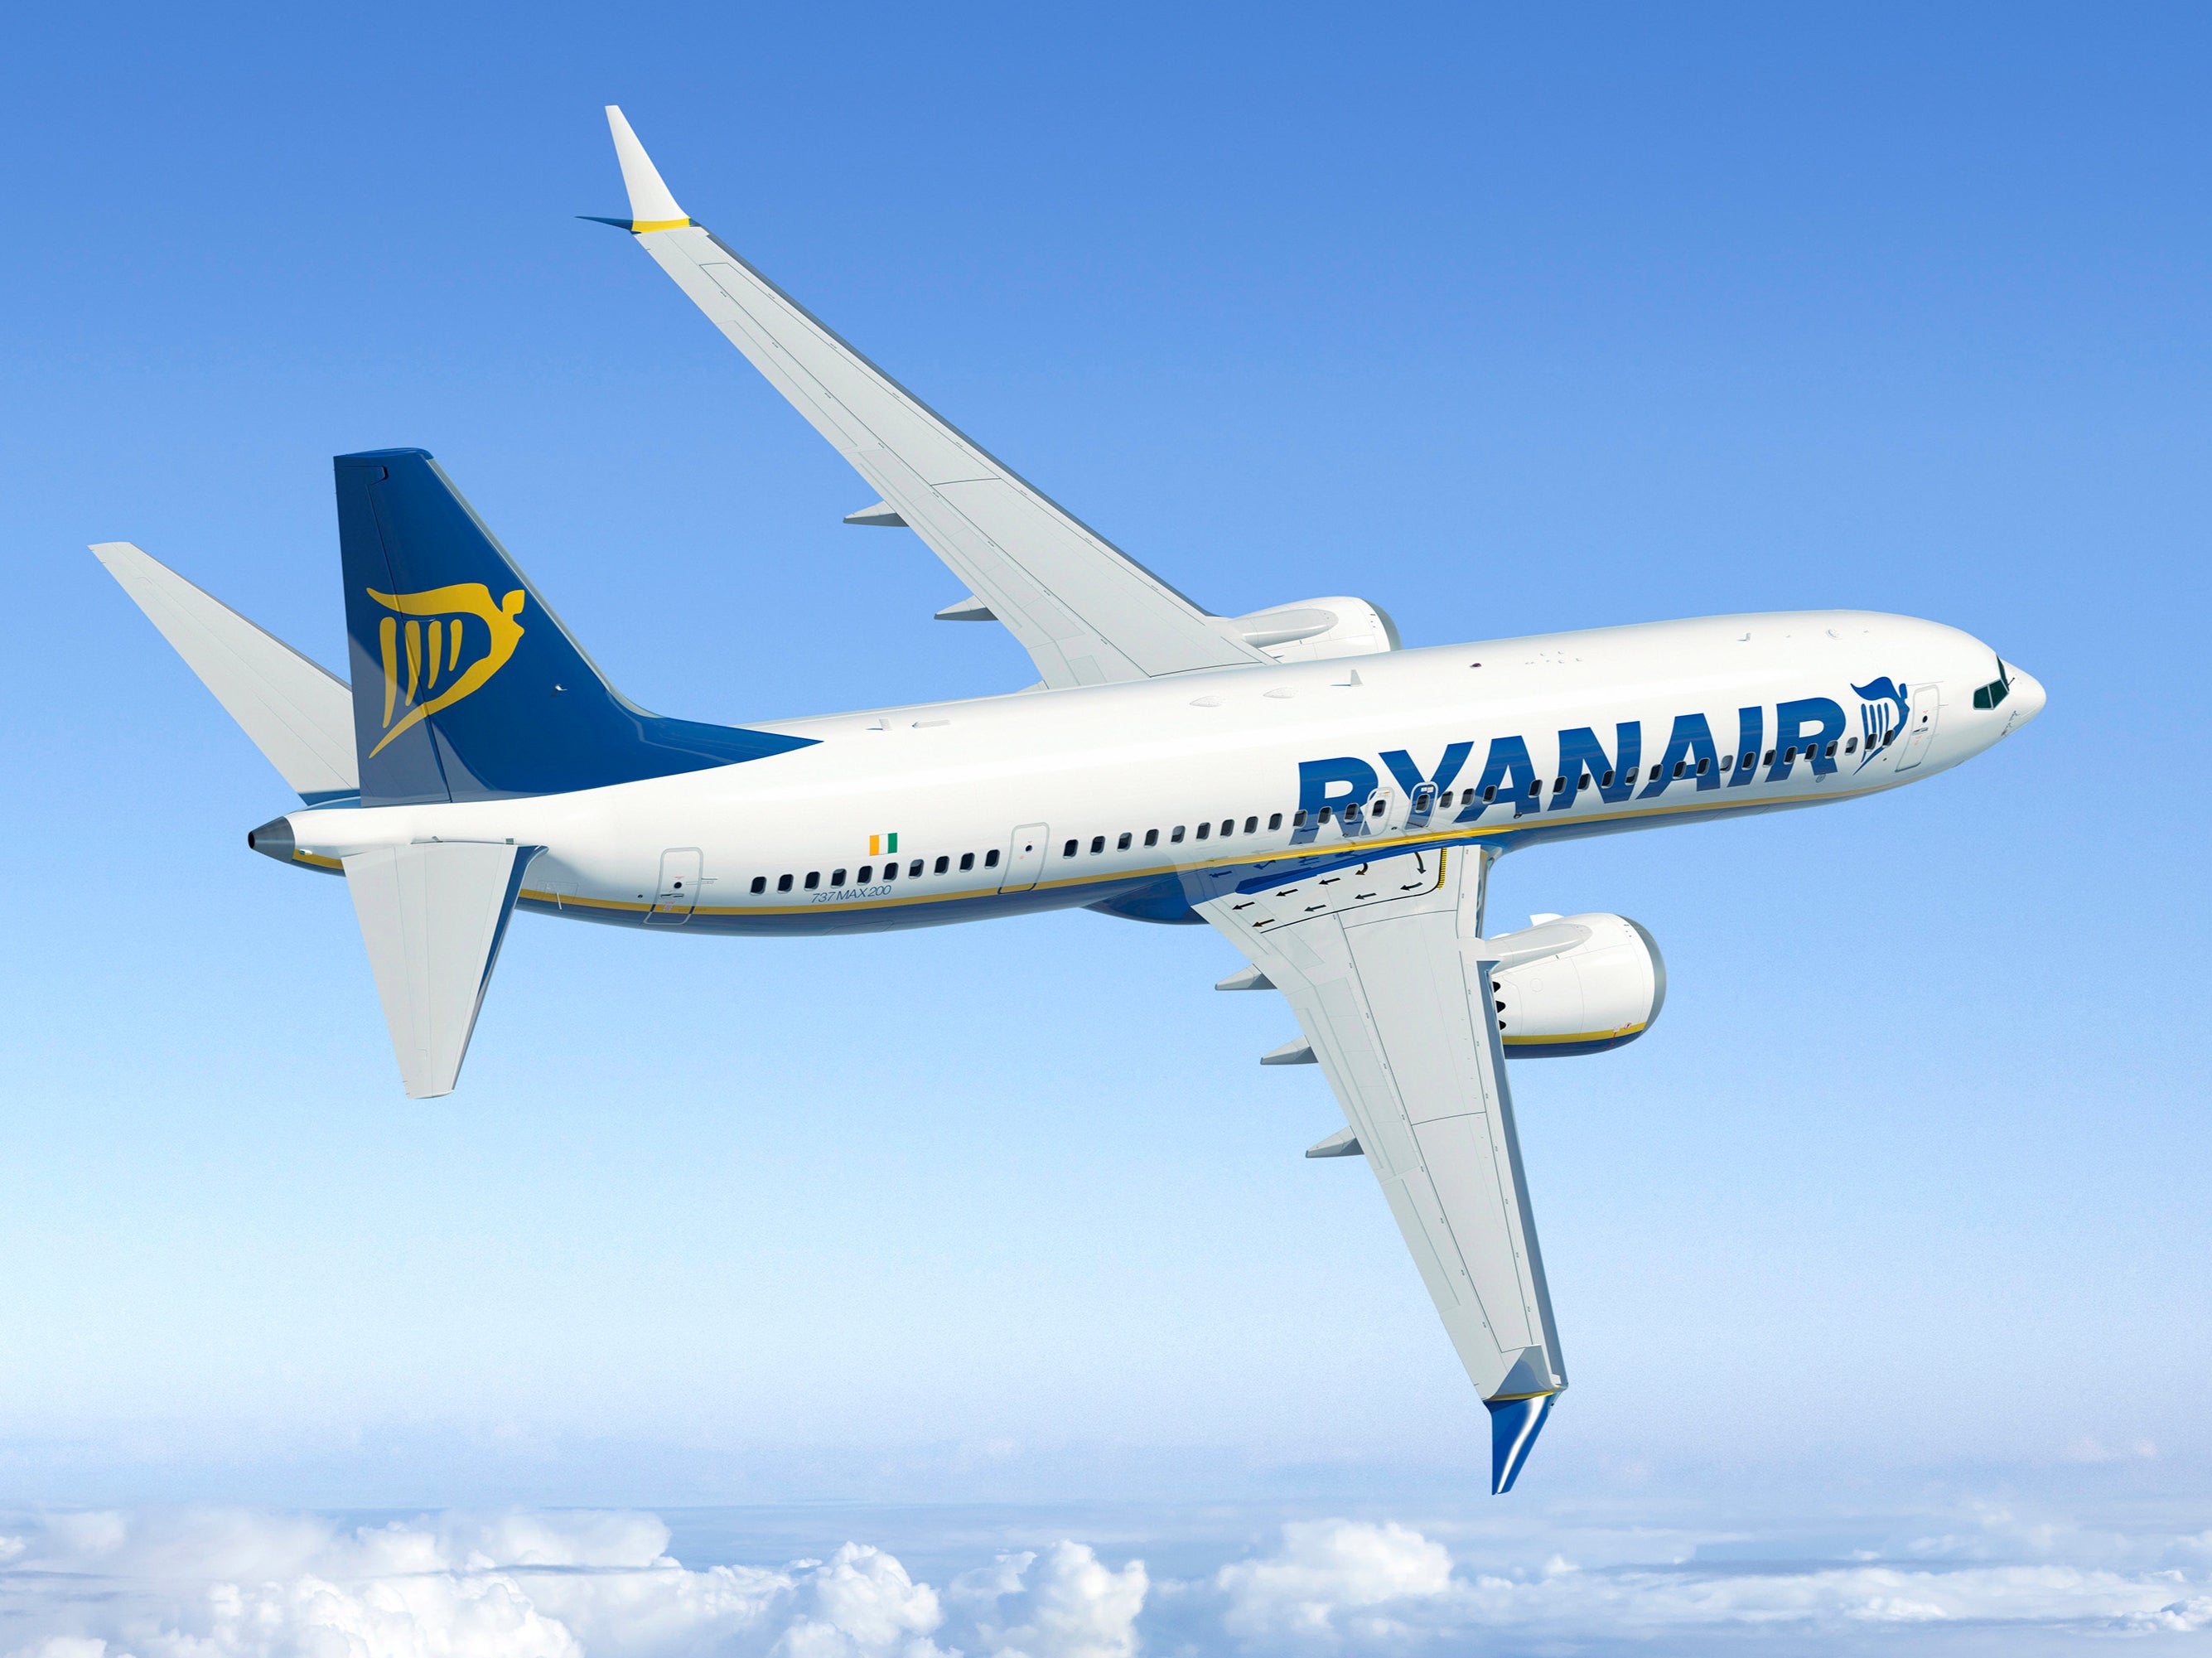 Ambitious plans: Ryanair believes its order for 210 Boeing 737 Max aircraft will allow rapid expansion